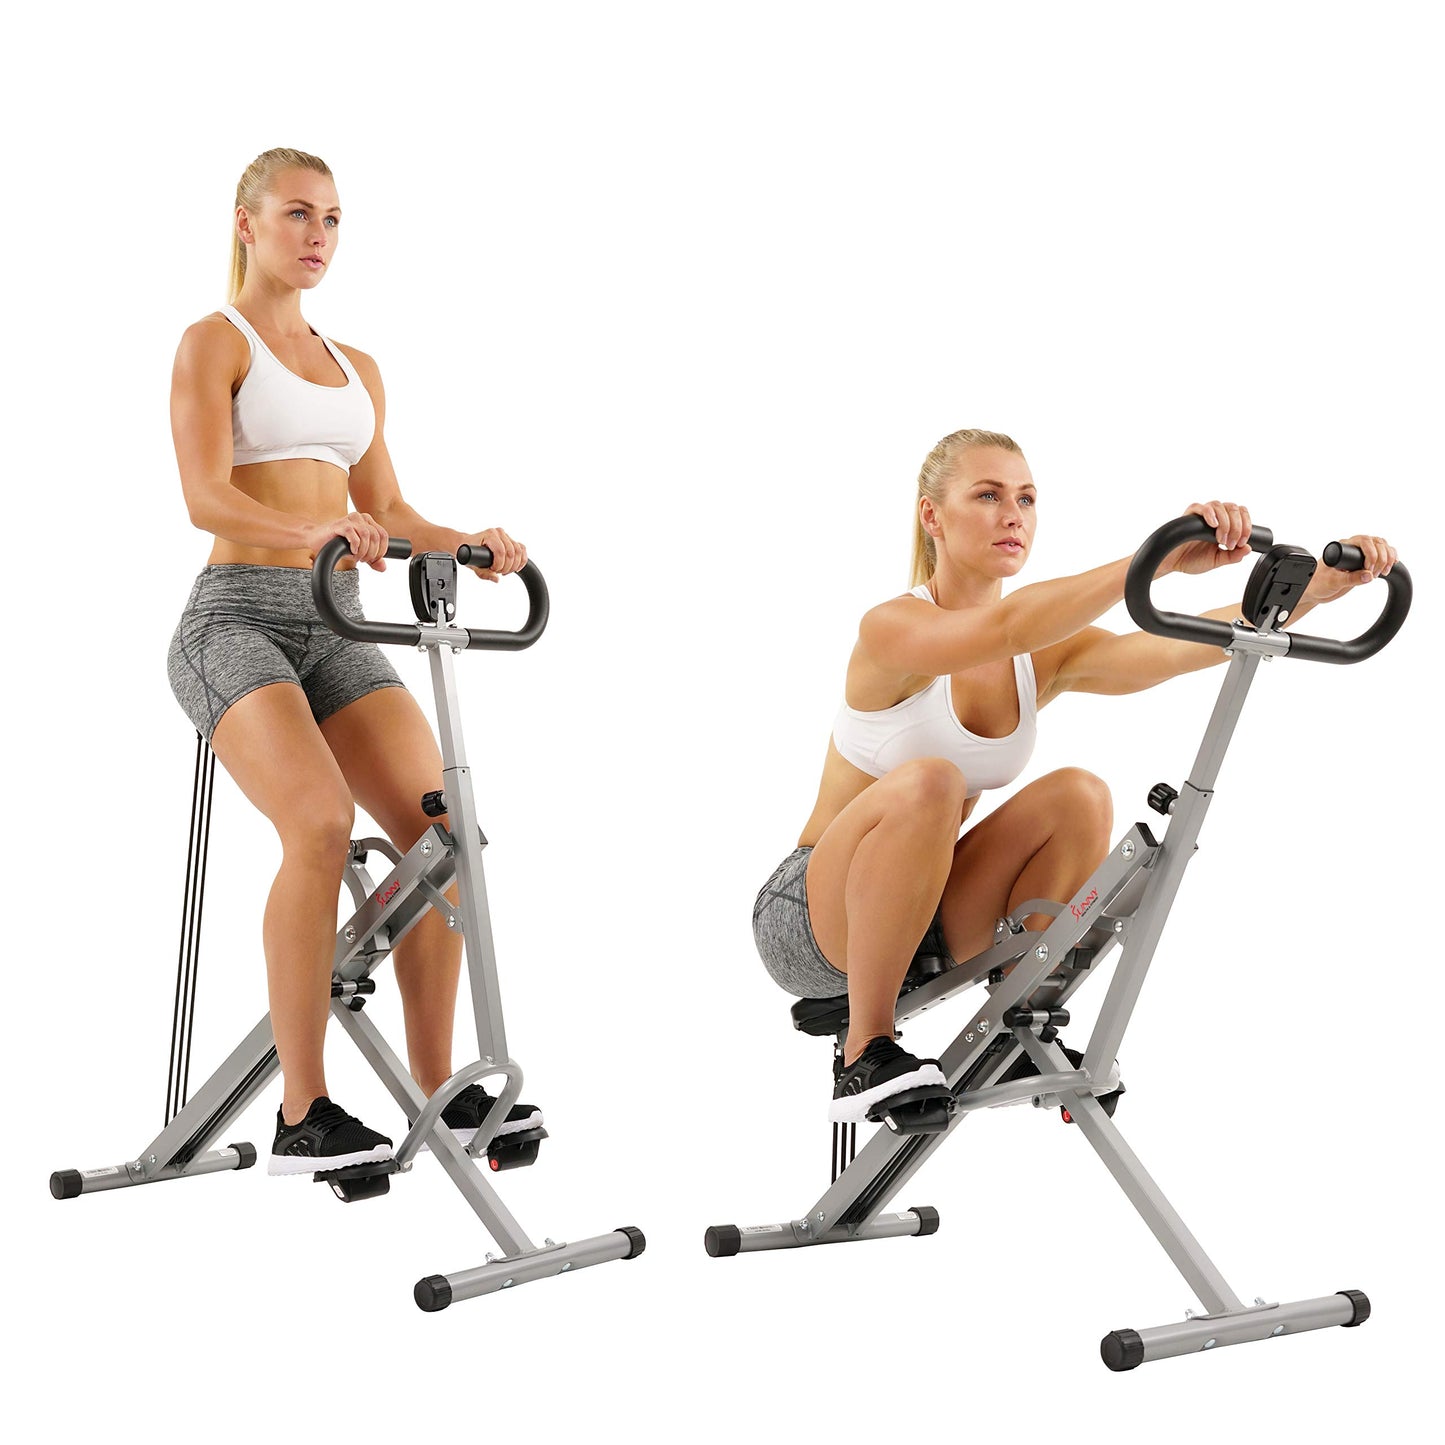 Sunny Health & Fitness Squat Assist Row-N-Ride™ Trainer for Glutes Workout with Online Training Video